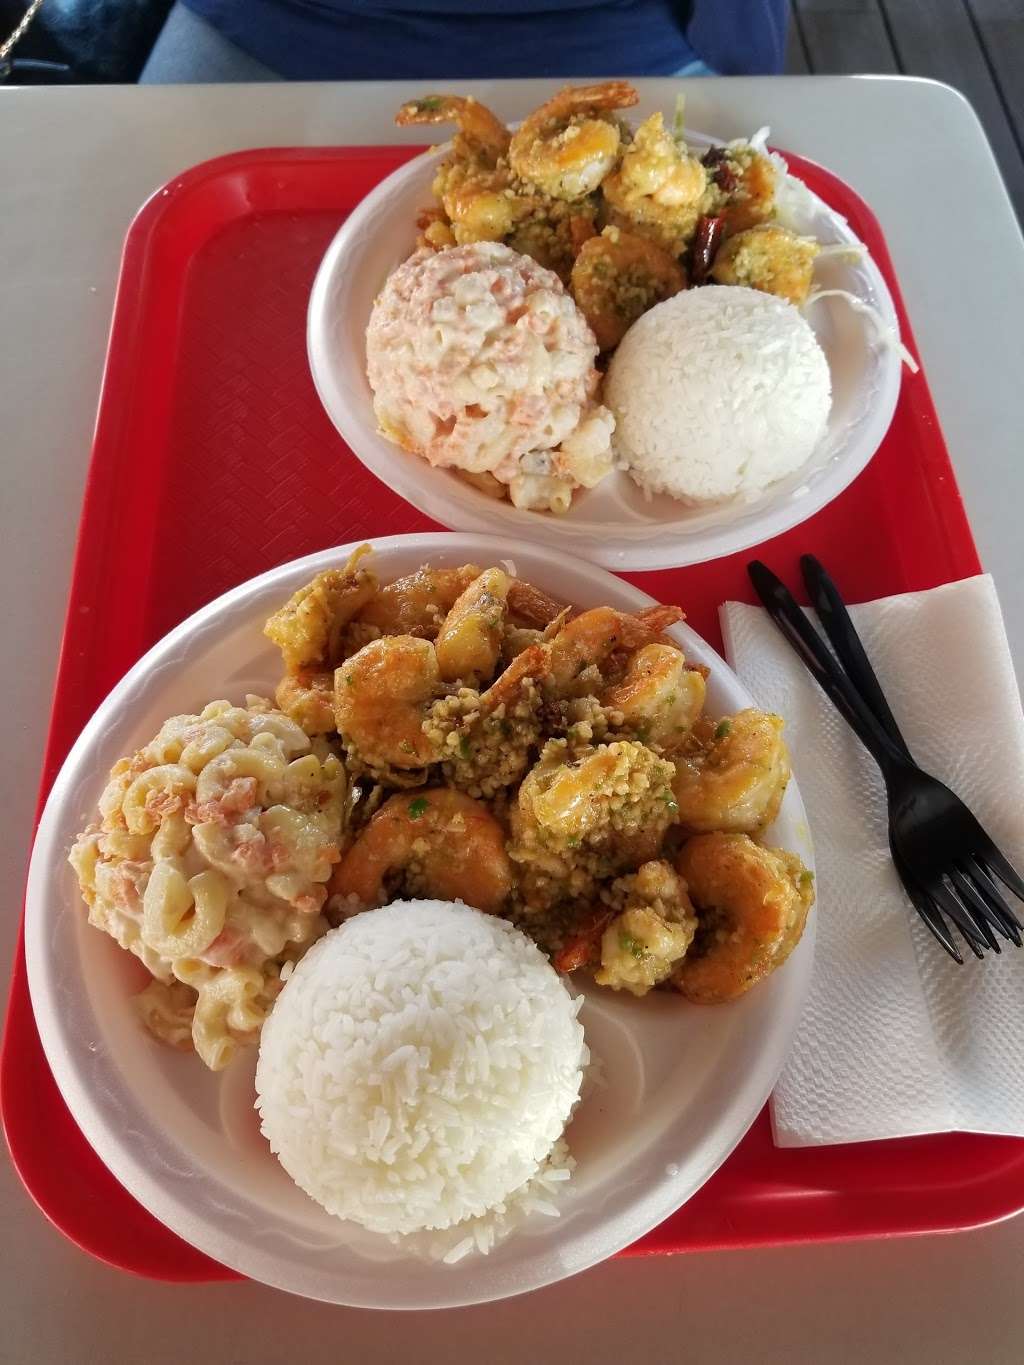 Seafood Express | 2122 Beverly Blvd, Los Angeles, CA 90057 | Phone: (213) 483-2122